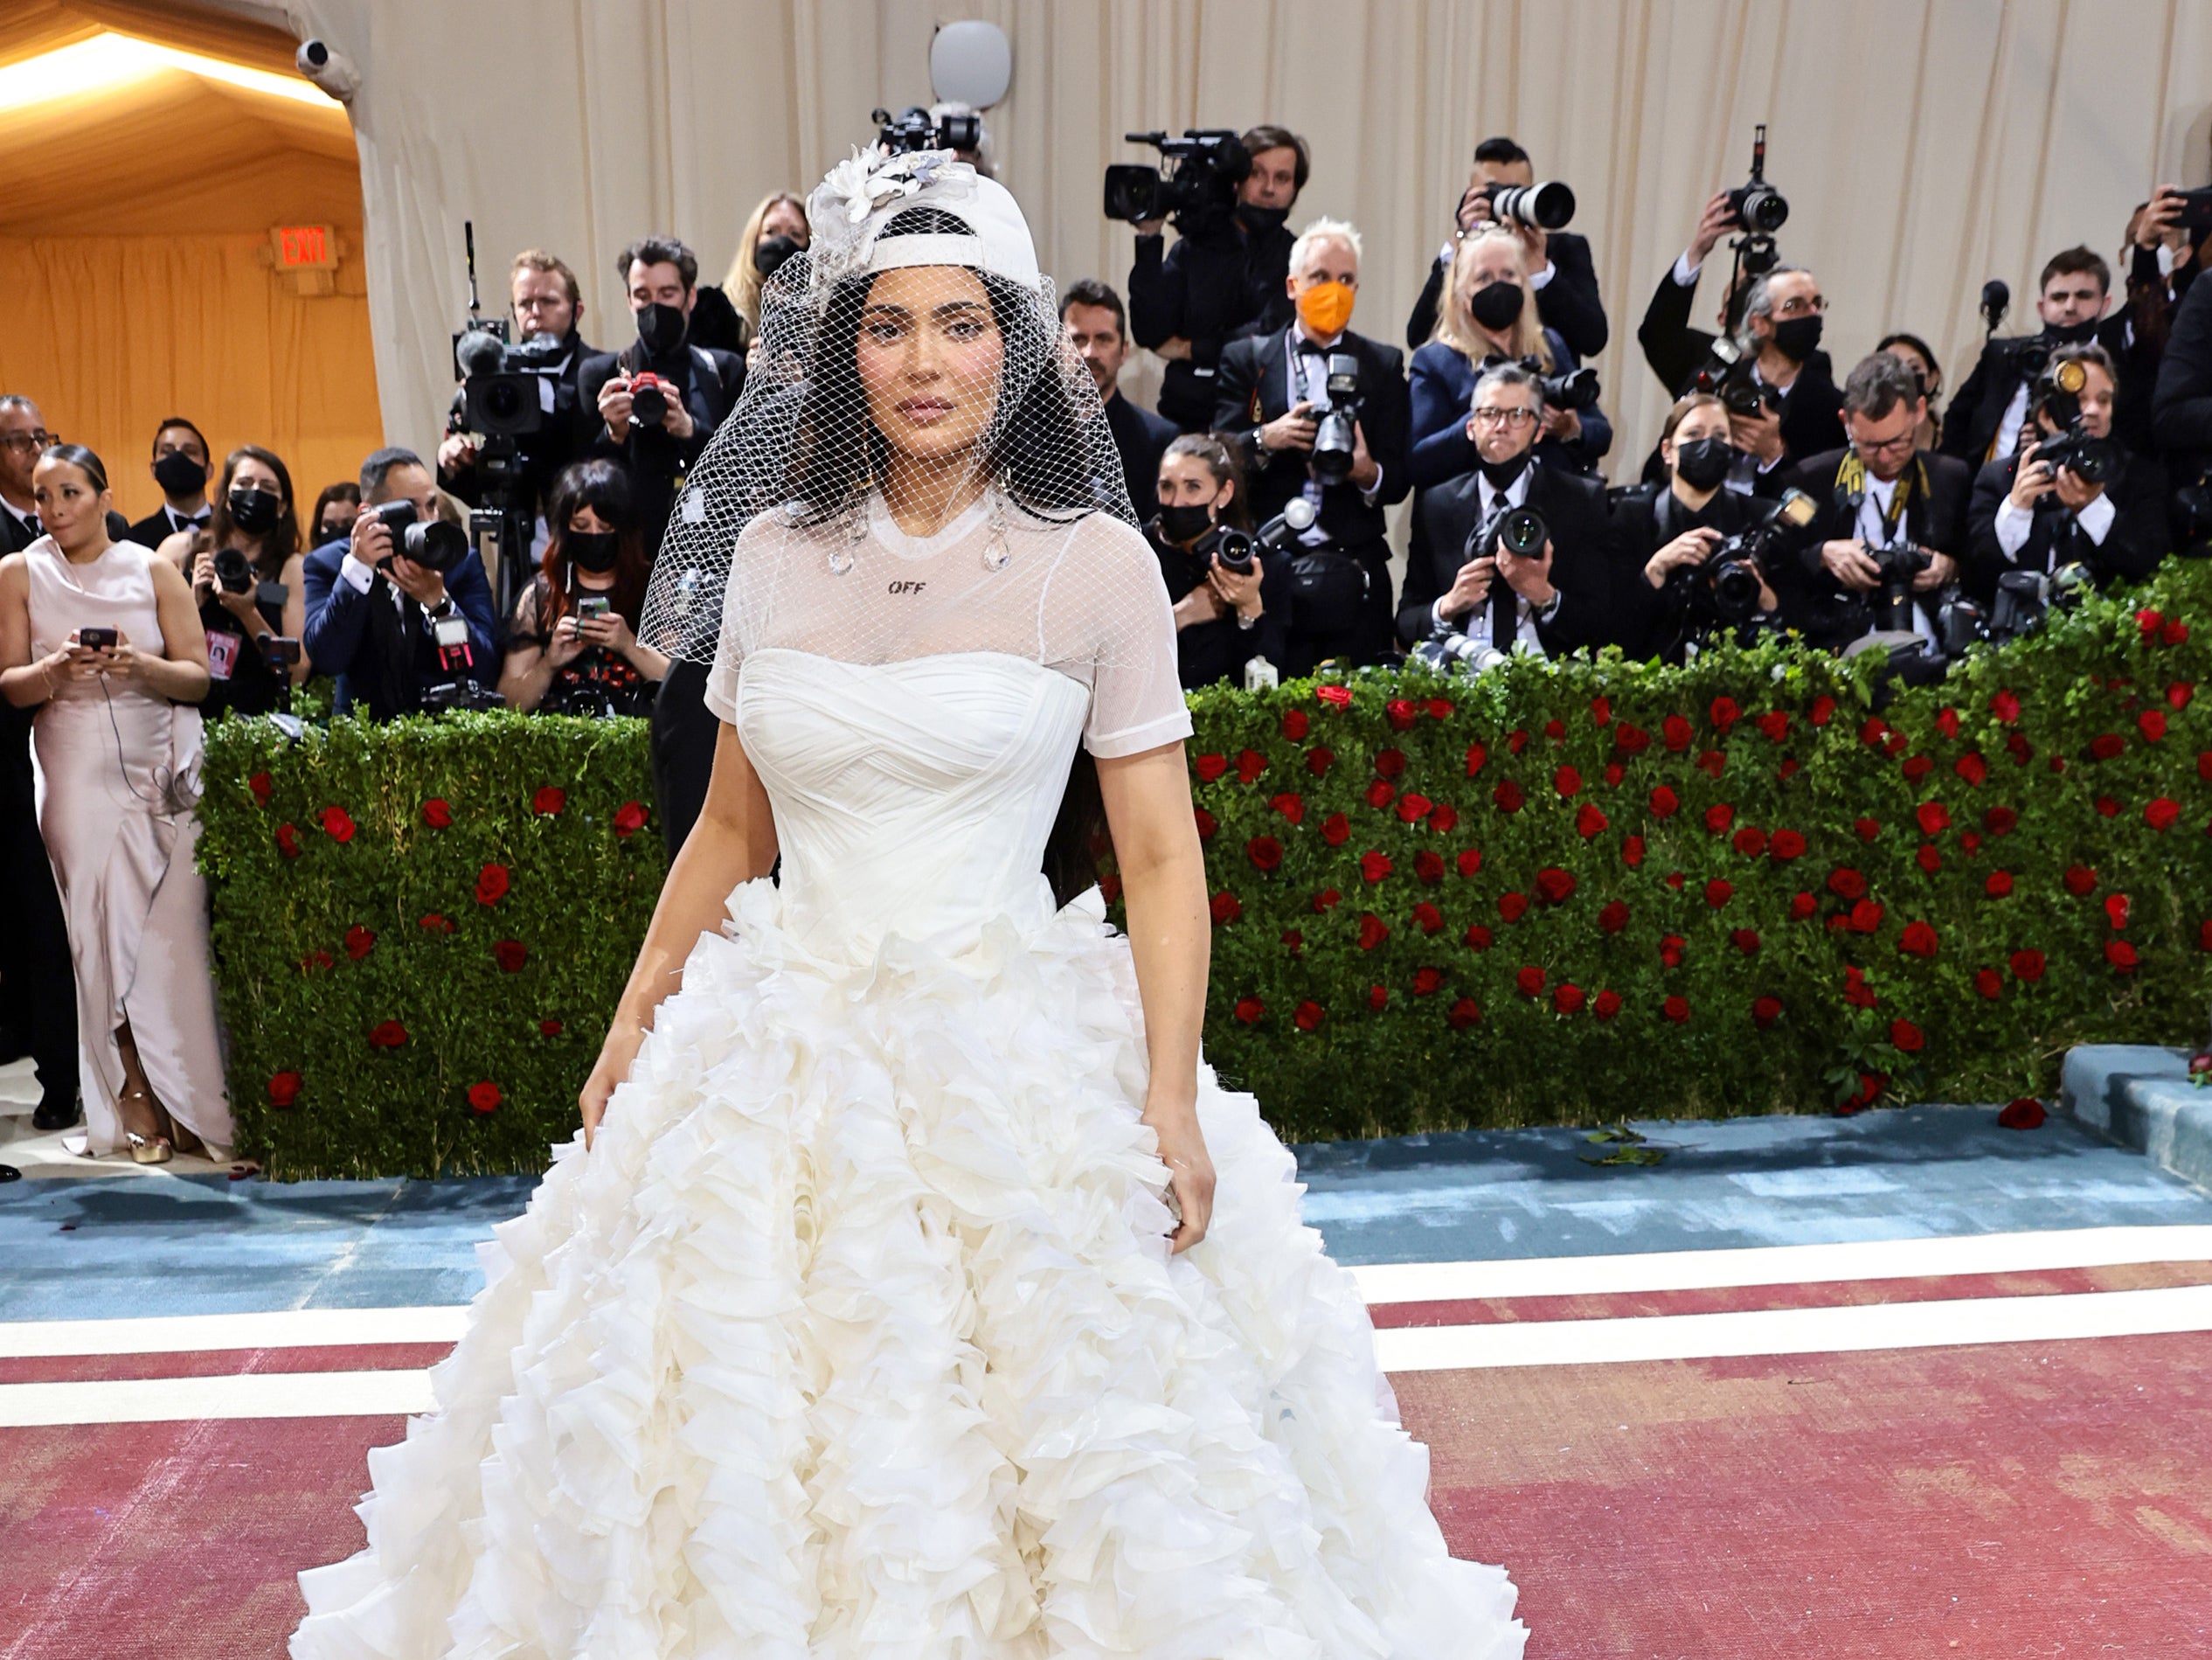 Kylie Jenner sparks mixed reactions after wearing wedding gown to Met